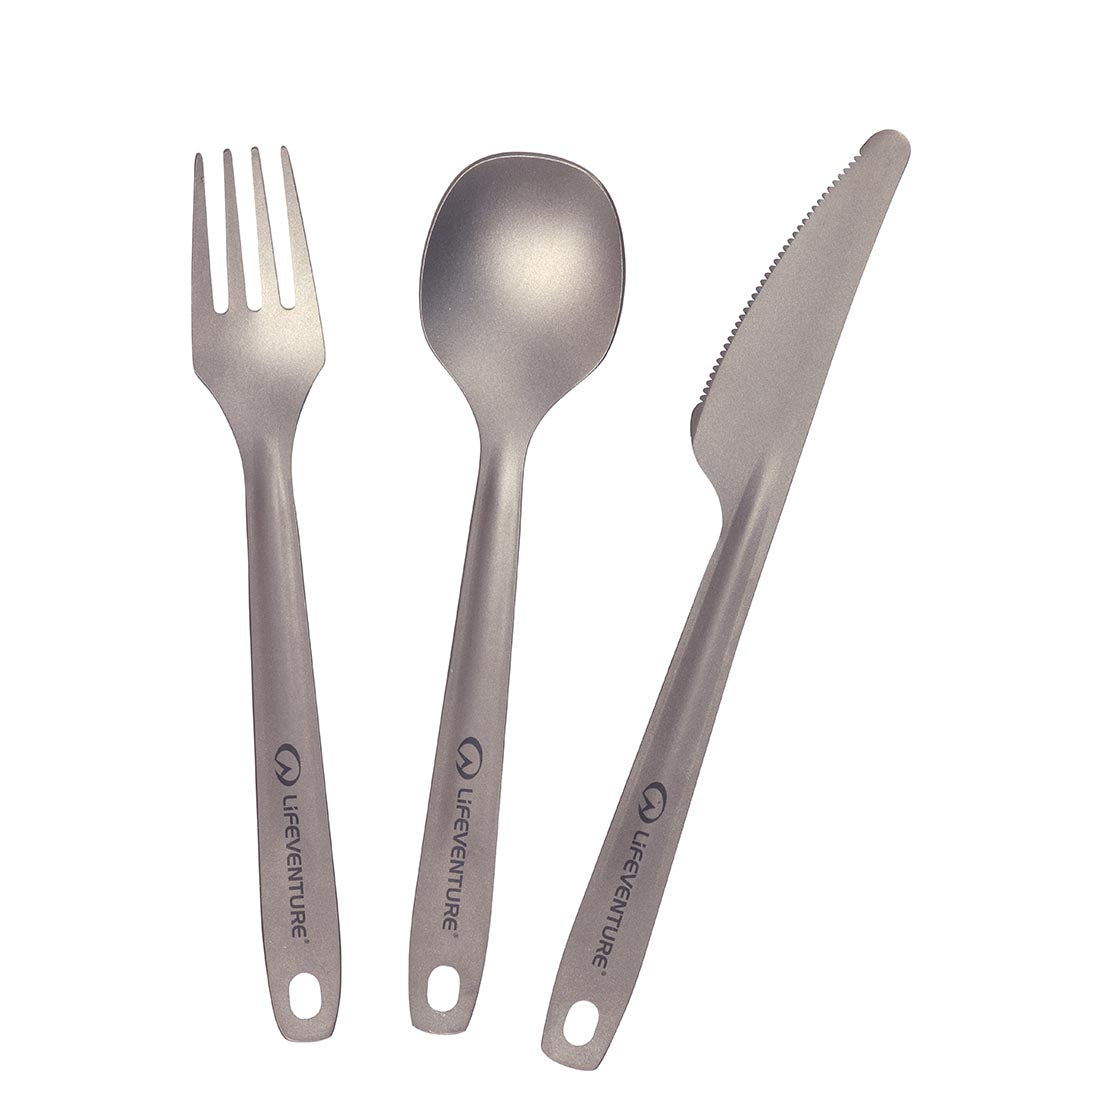 Ensō Essential Titanium Cutlery Is the Last Set You'll Ever Need